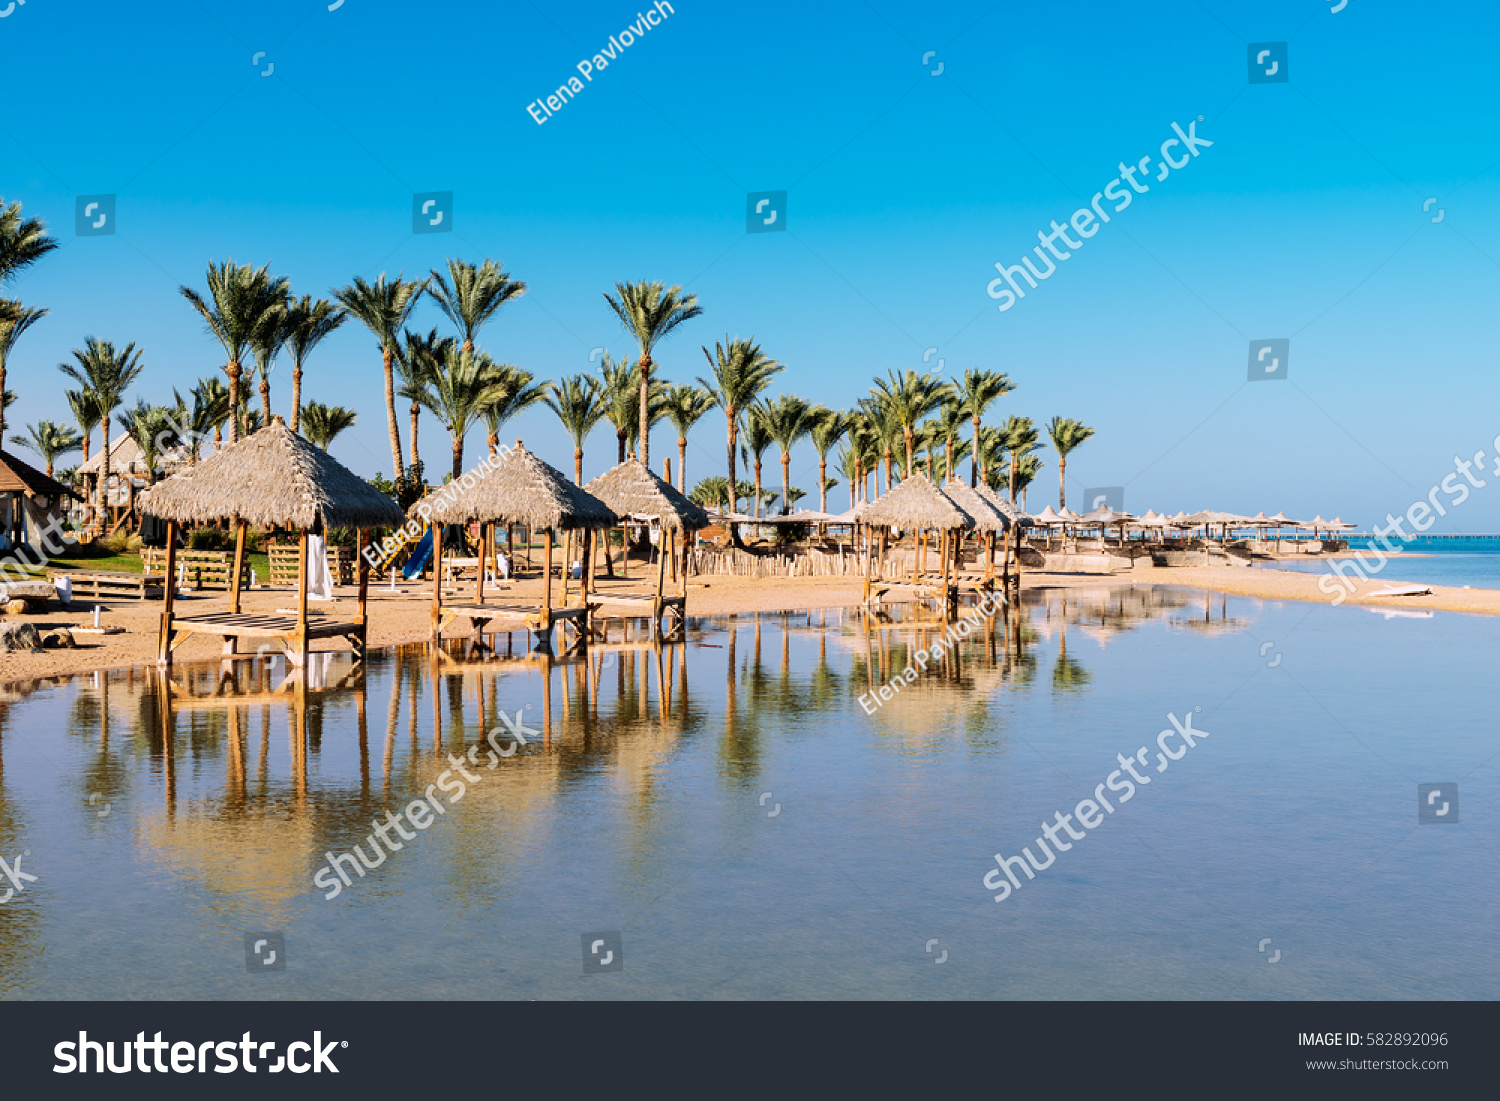 Beautiful  beach with palm trees at sunset, Sharm El Sheikh,  Red sea, Egypt #582892096